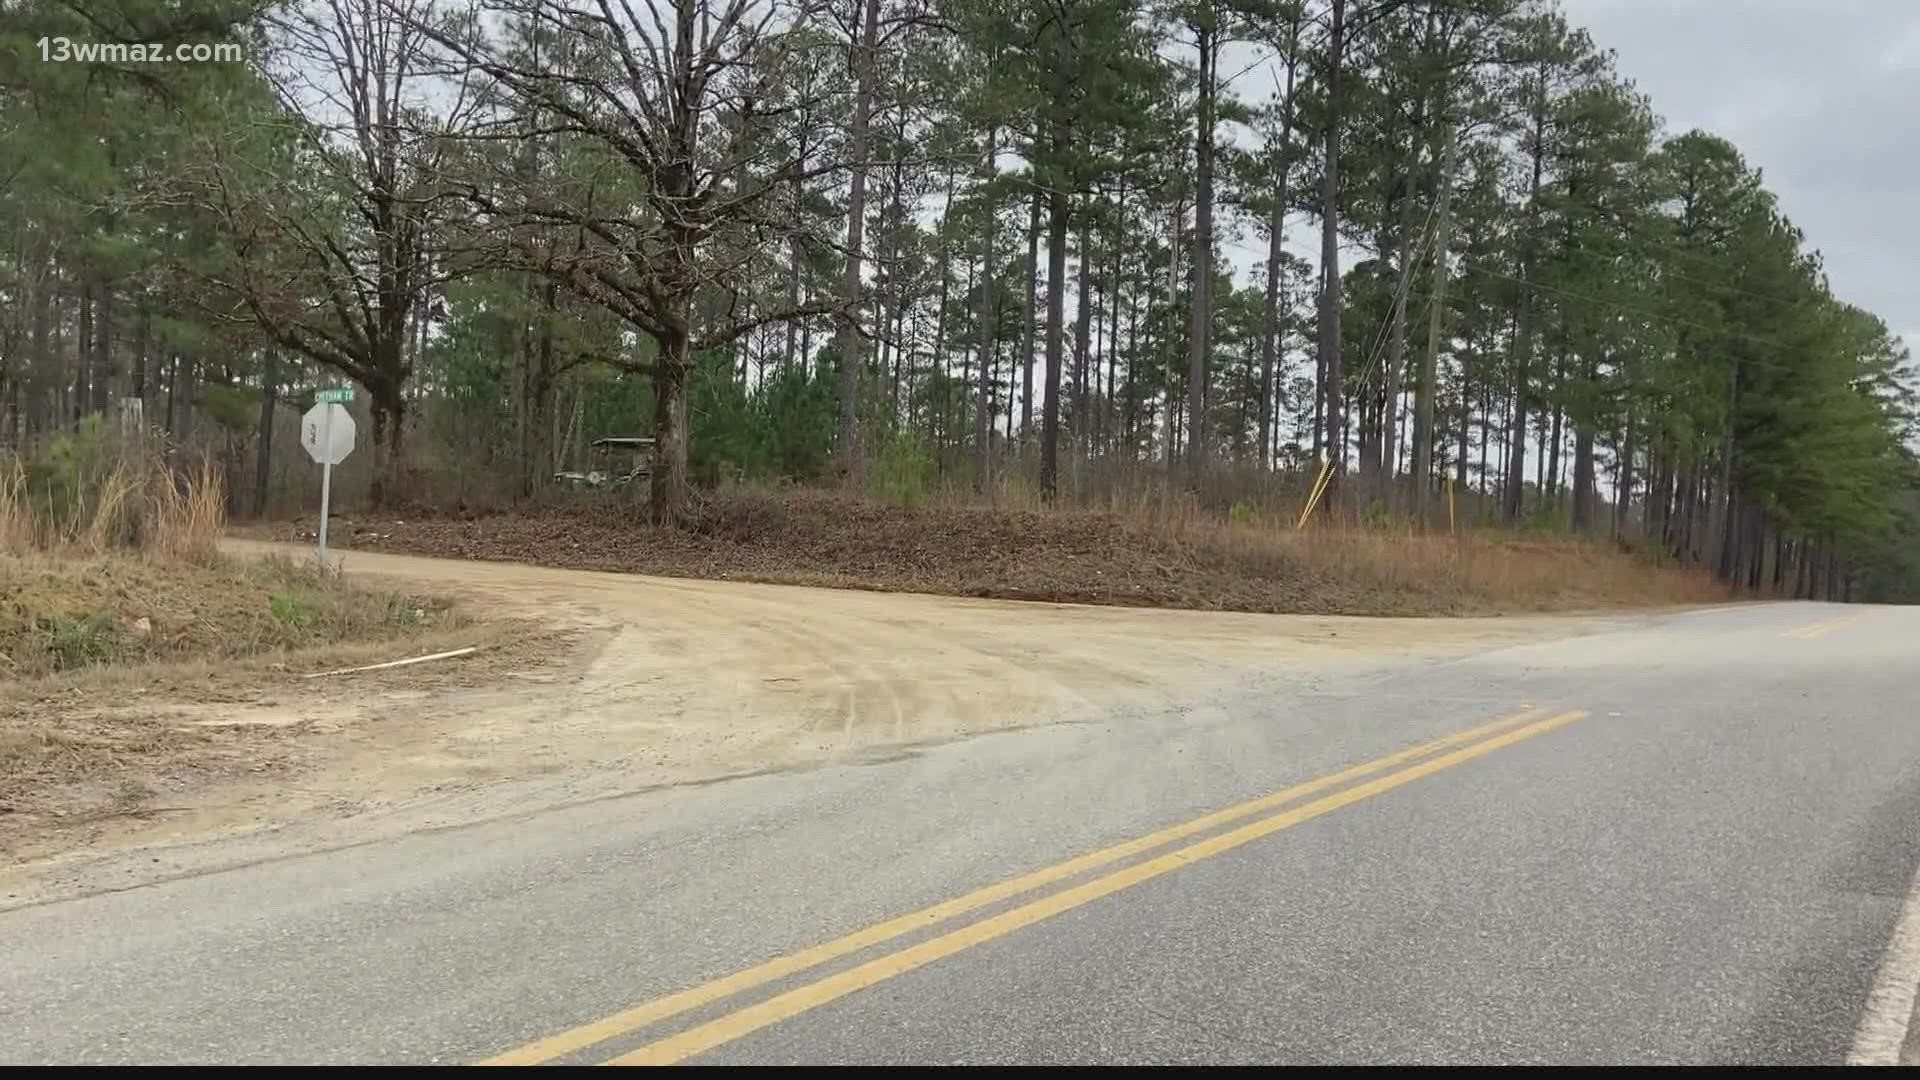 His body was found near the intersection of Howard Roberts Road and Cheehaw Trail in Gray.